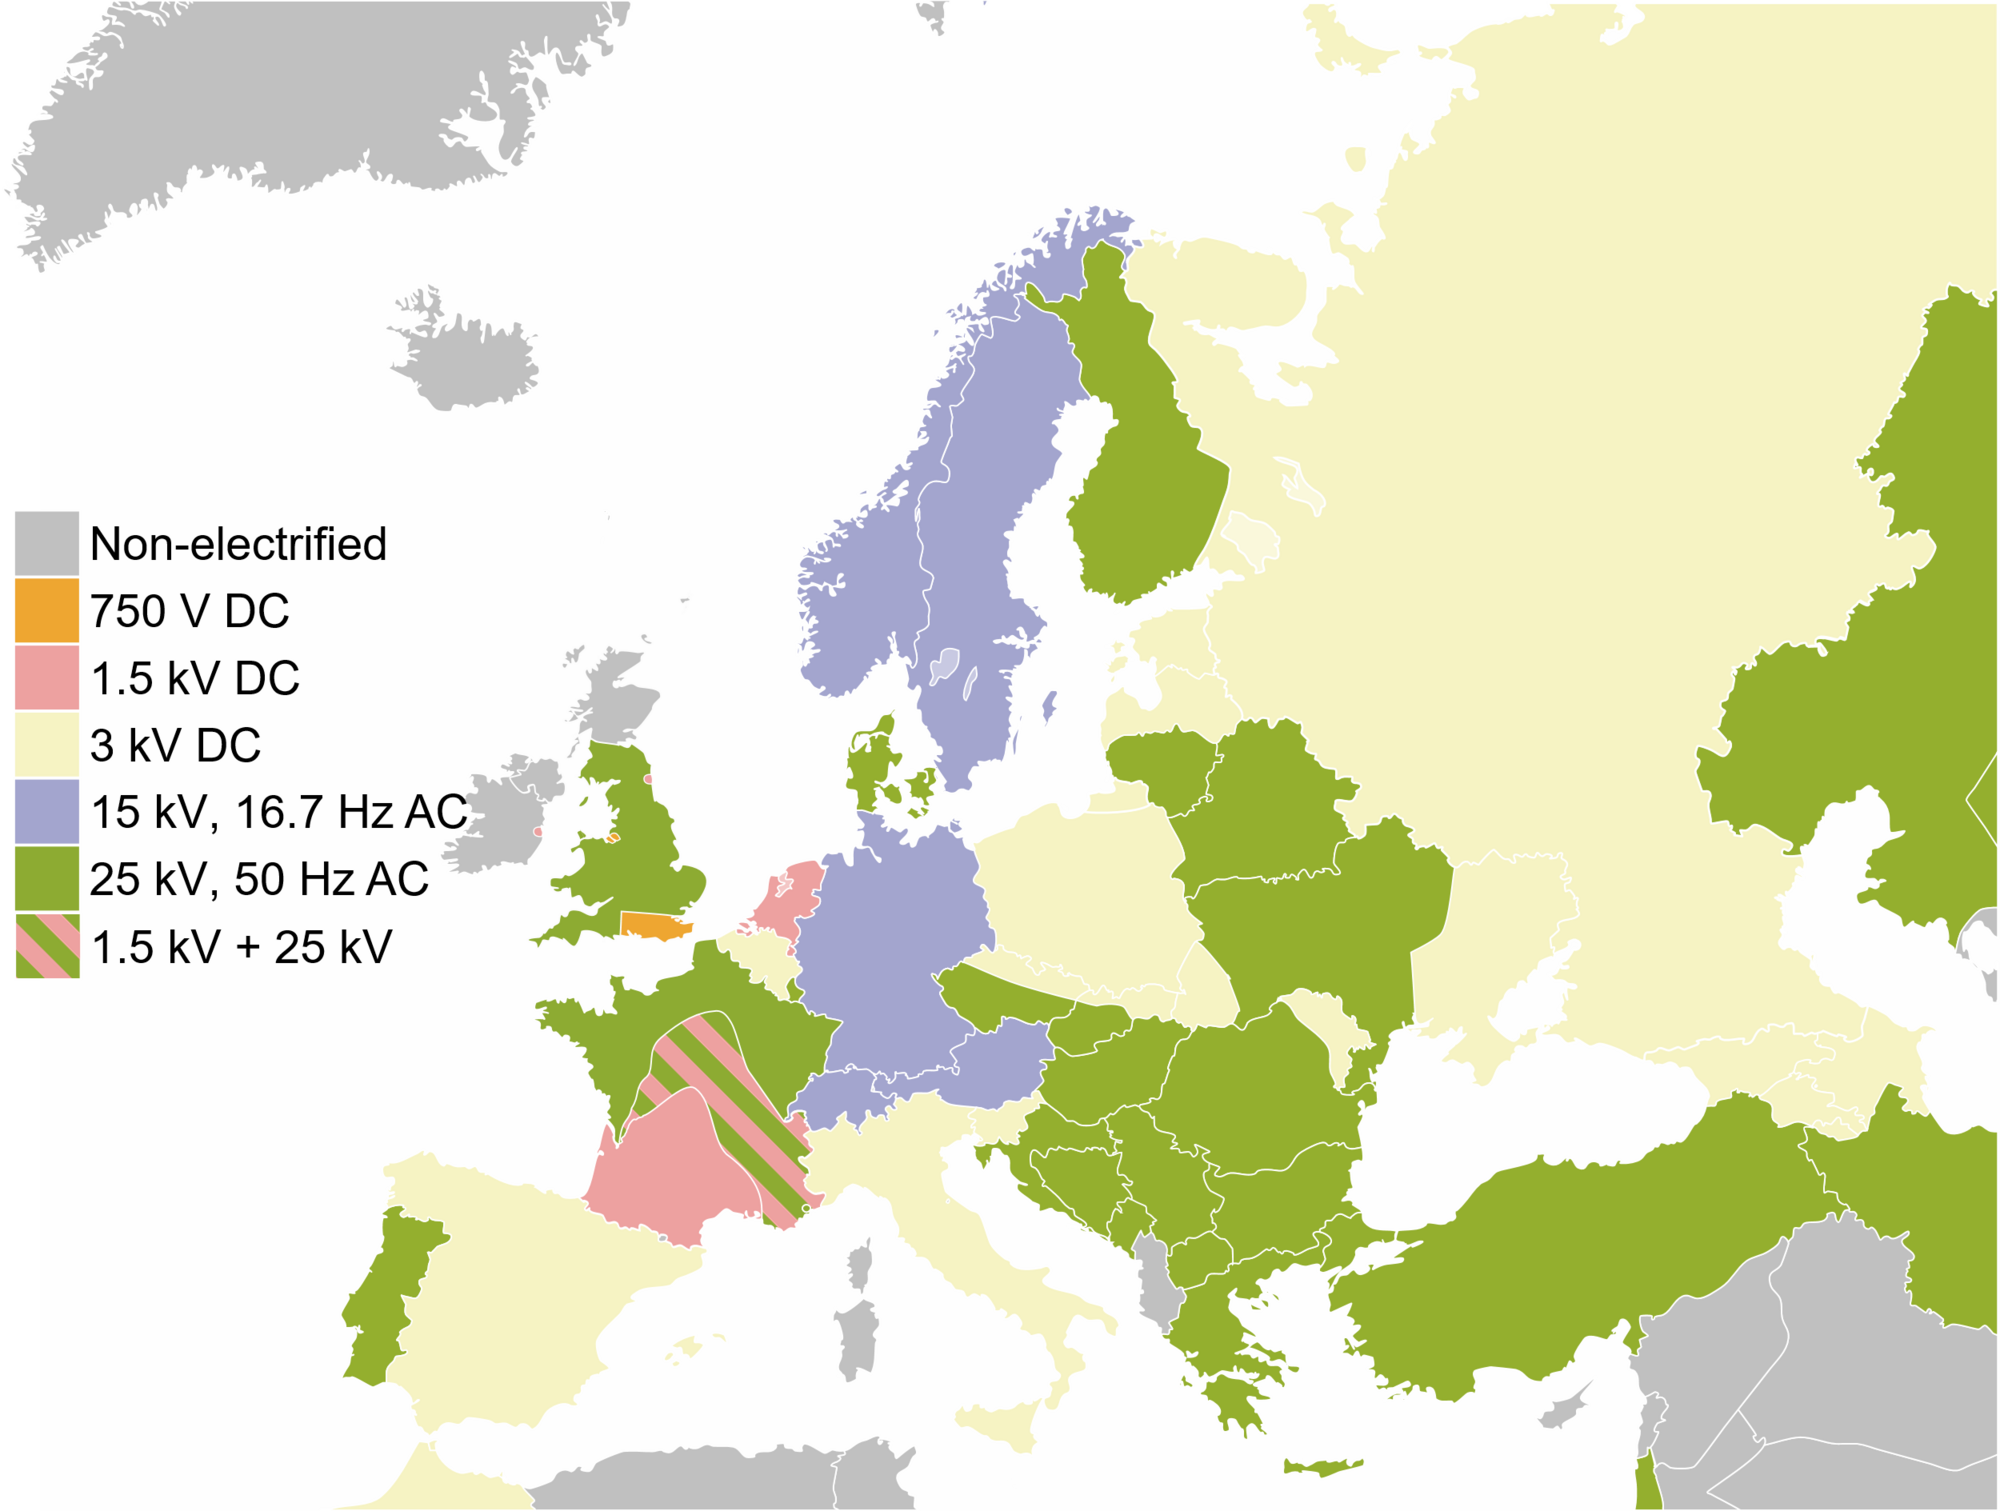 Figure 1: Overhead power systems in Europe